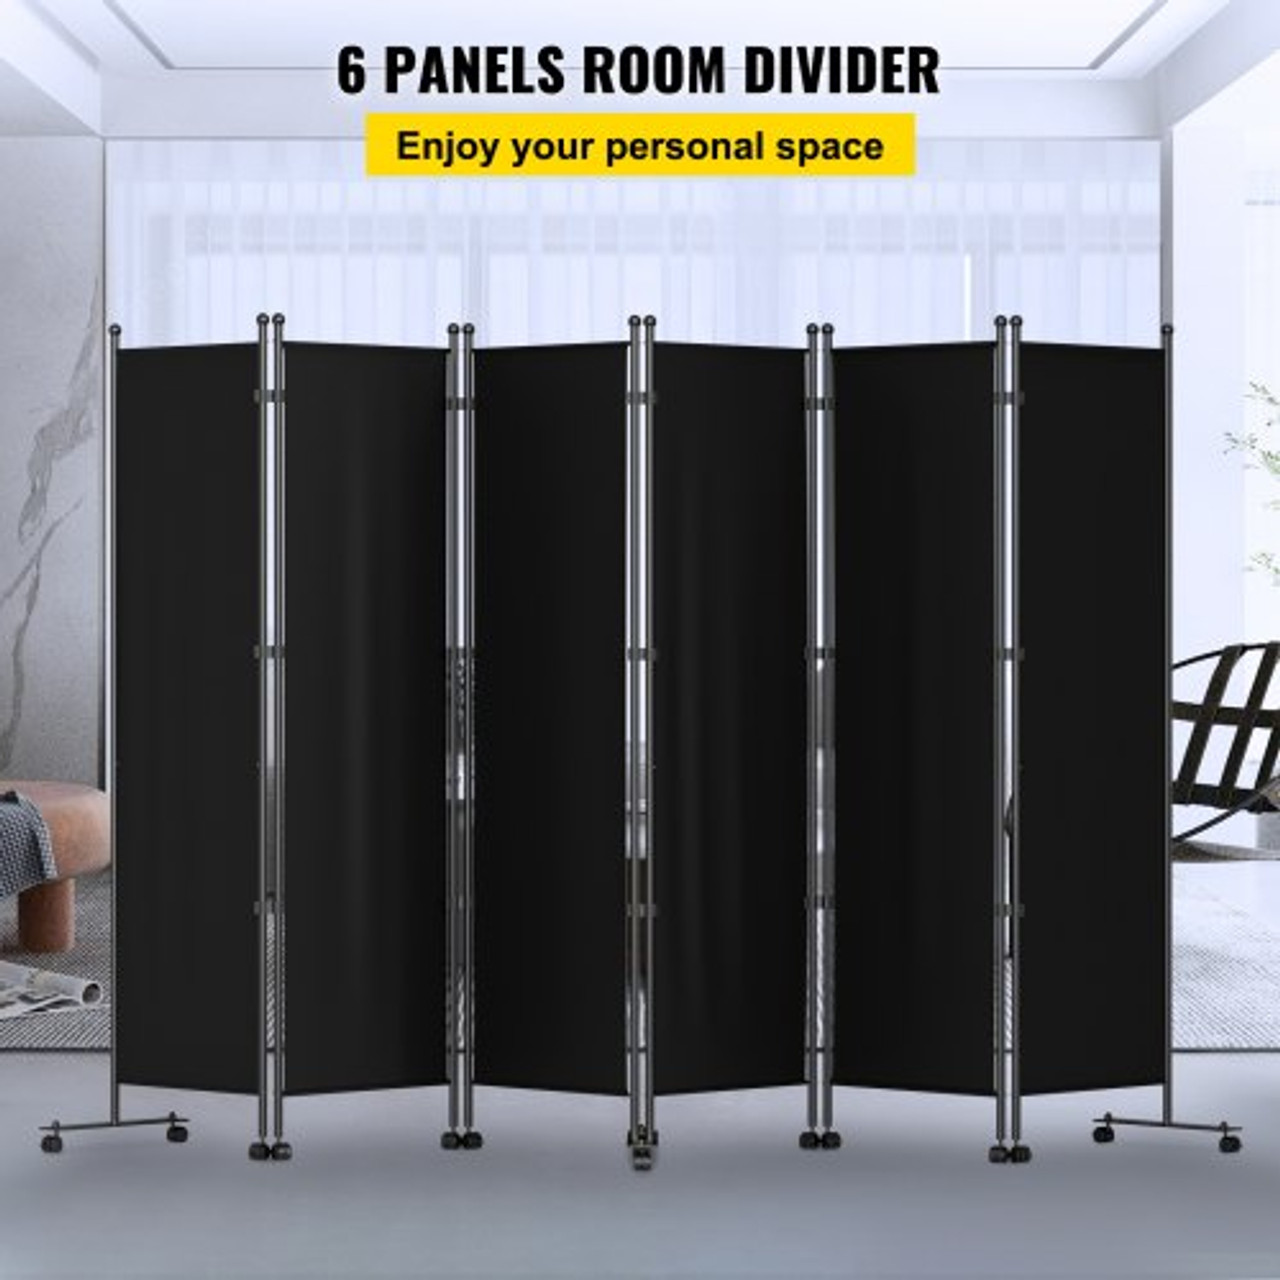 6 Panel Room Divider, 6 FT Tall, Freestanding & Folding Privacy Screen w/ Swivel Casters & Aluminum Alloy Frame, Oxford Bag Included, Room Partition for Office Home, 121" W x 14" D x 73"H, Black